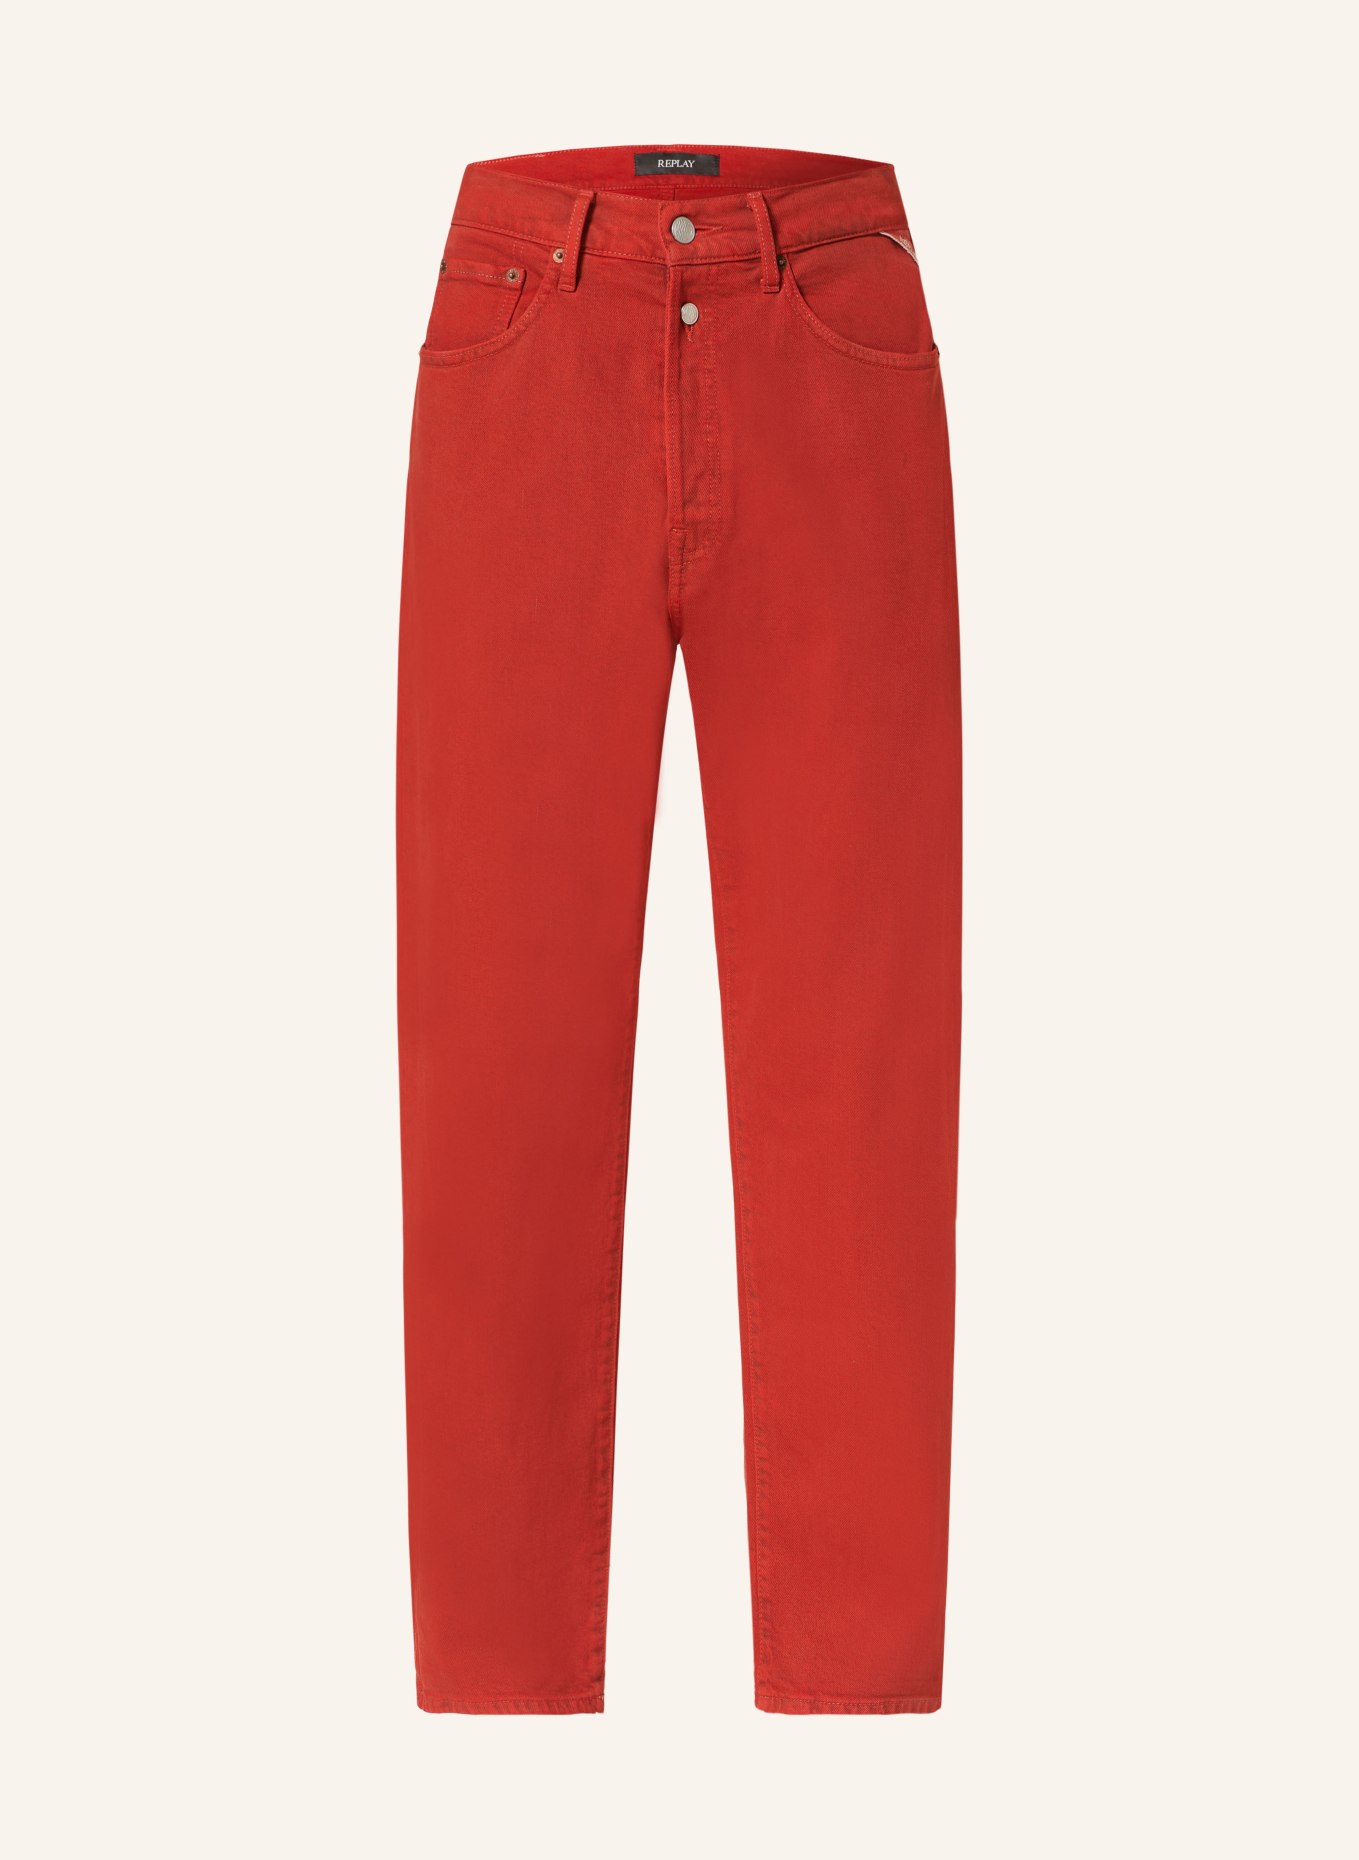 REPLAY Jeans Straight Fit, Farbe: 070 BRIGHT RED (Bild 1)